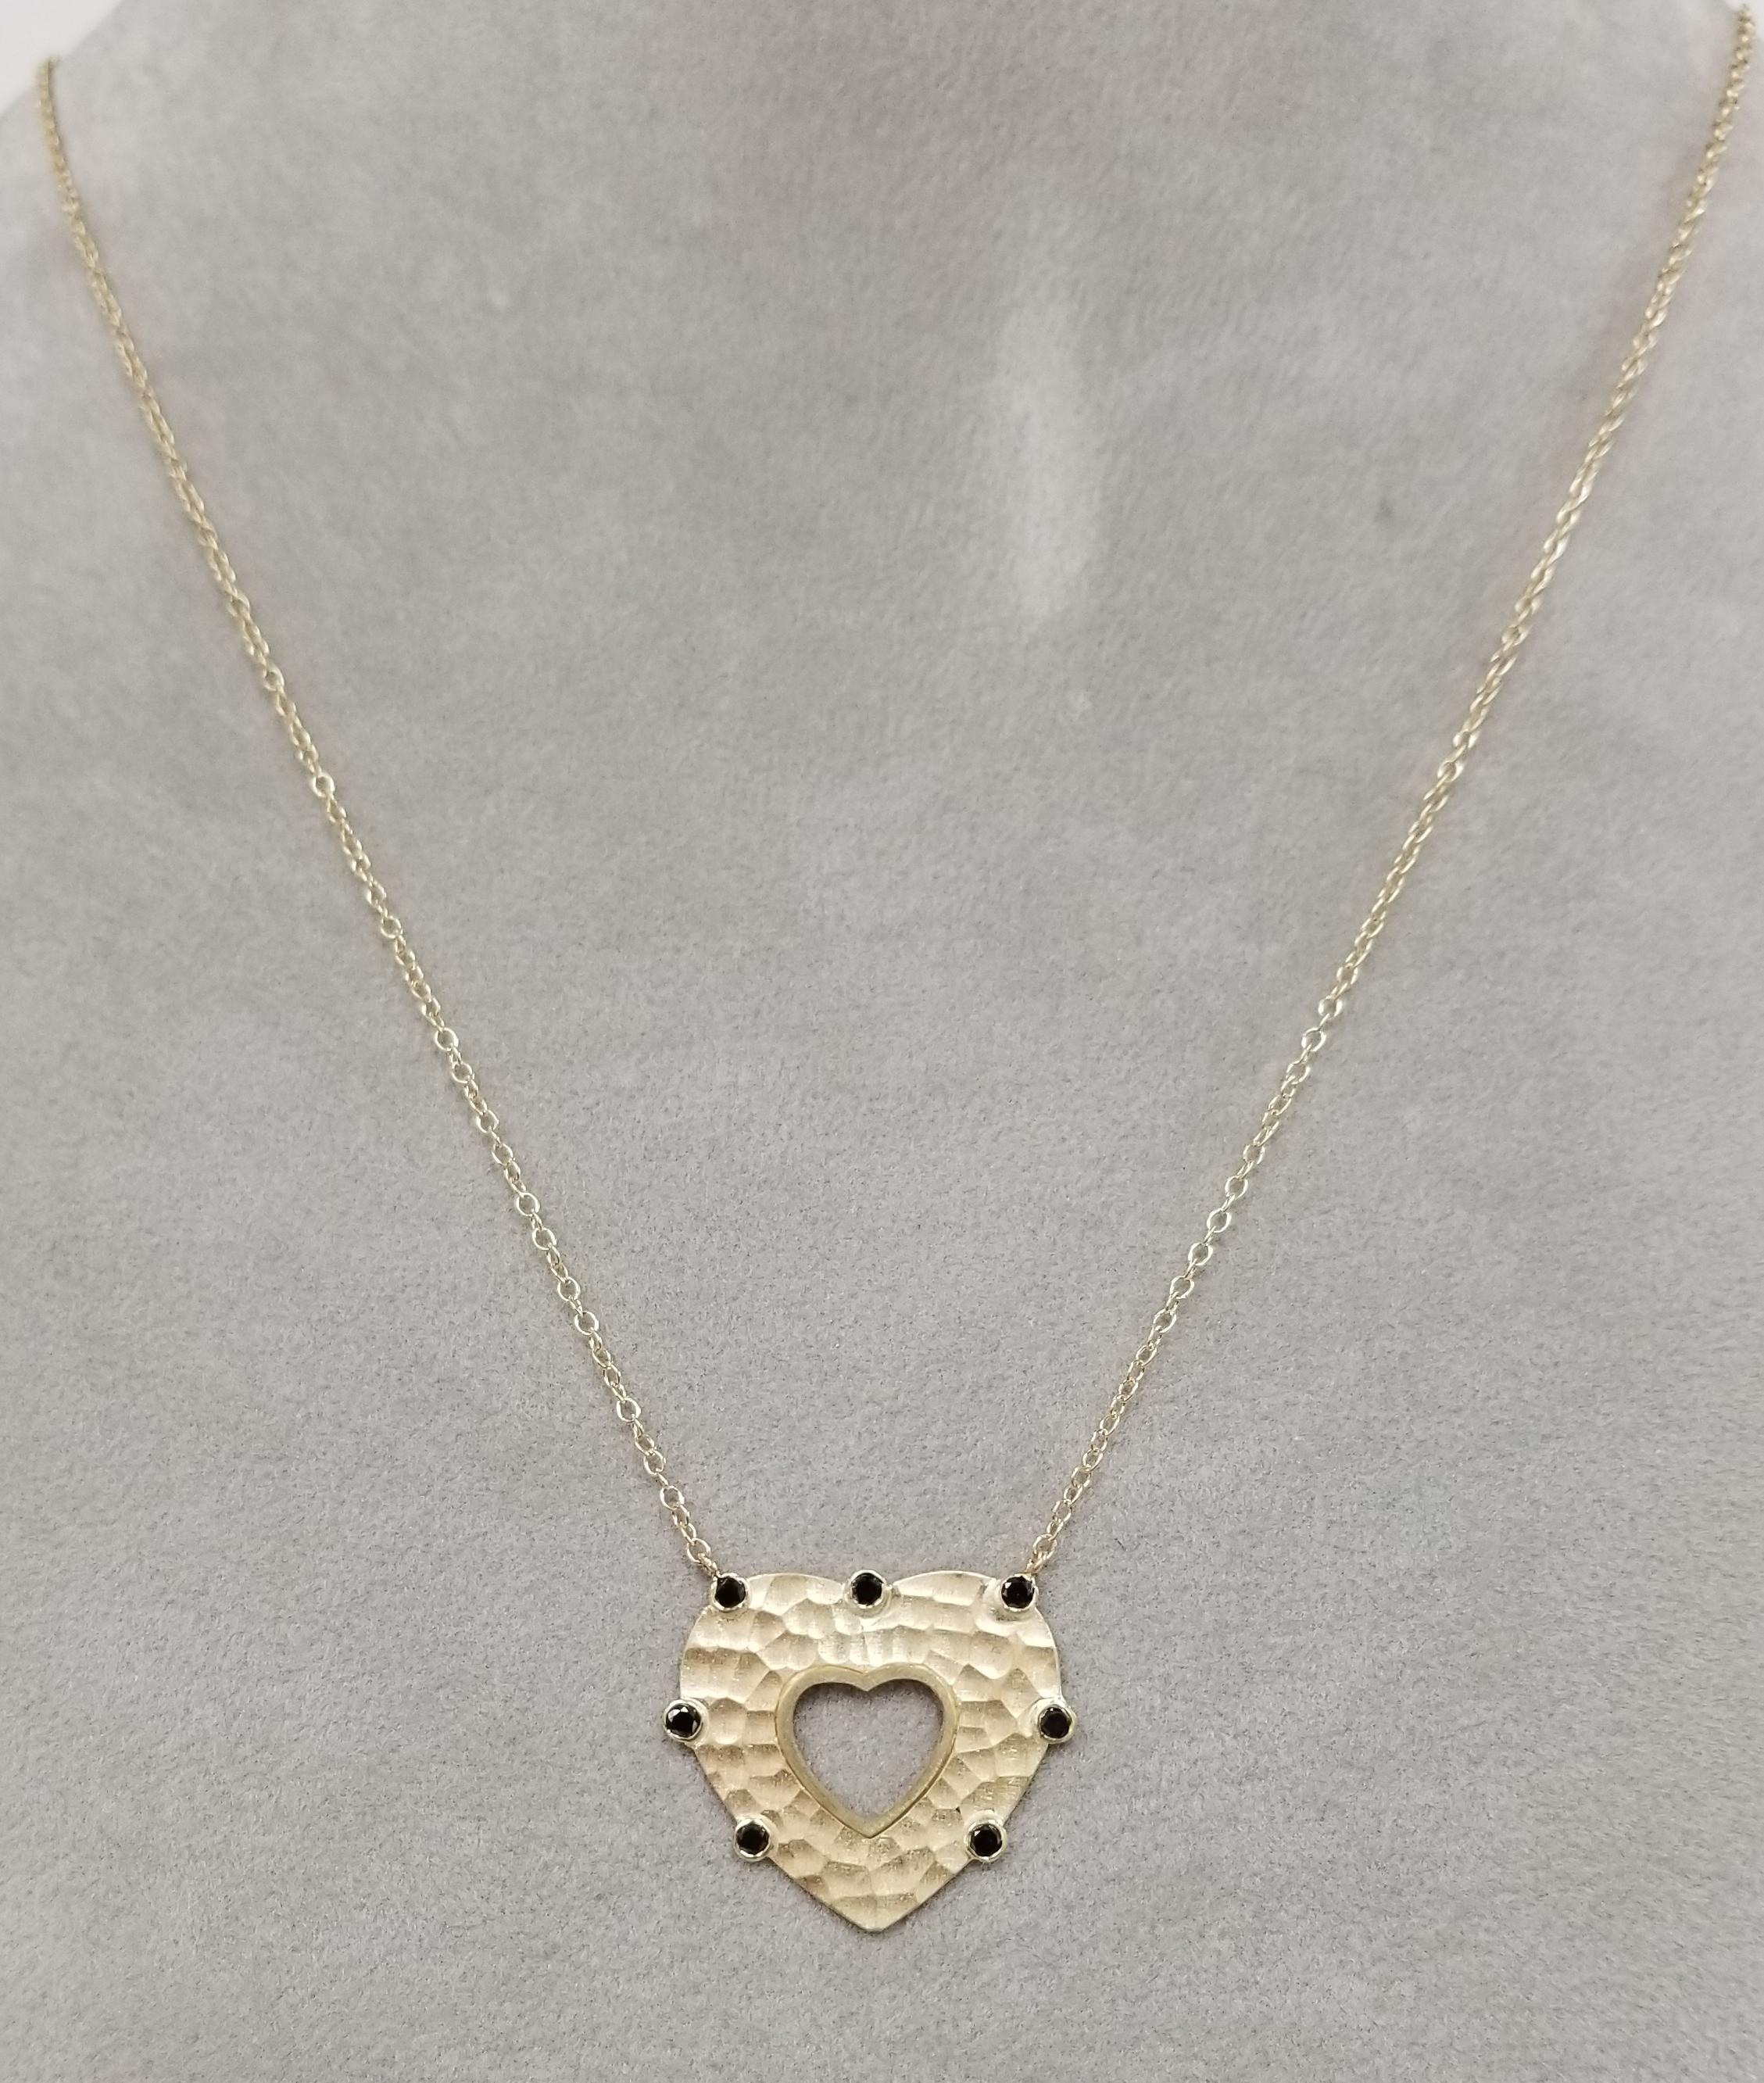 14k yellow gold  black diamond hammered heart necklace, containing 7 bezel set black round full cut diamonds weighing .28pts. on a 18 inch chain.